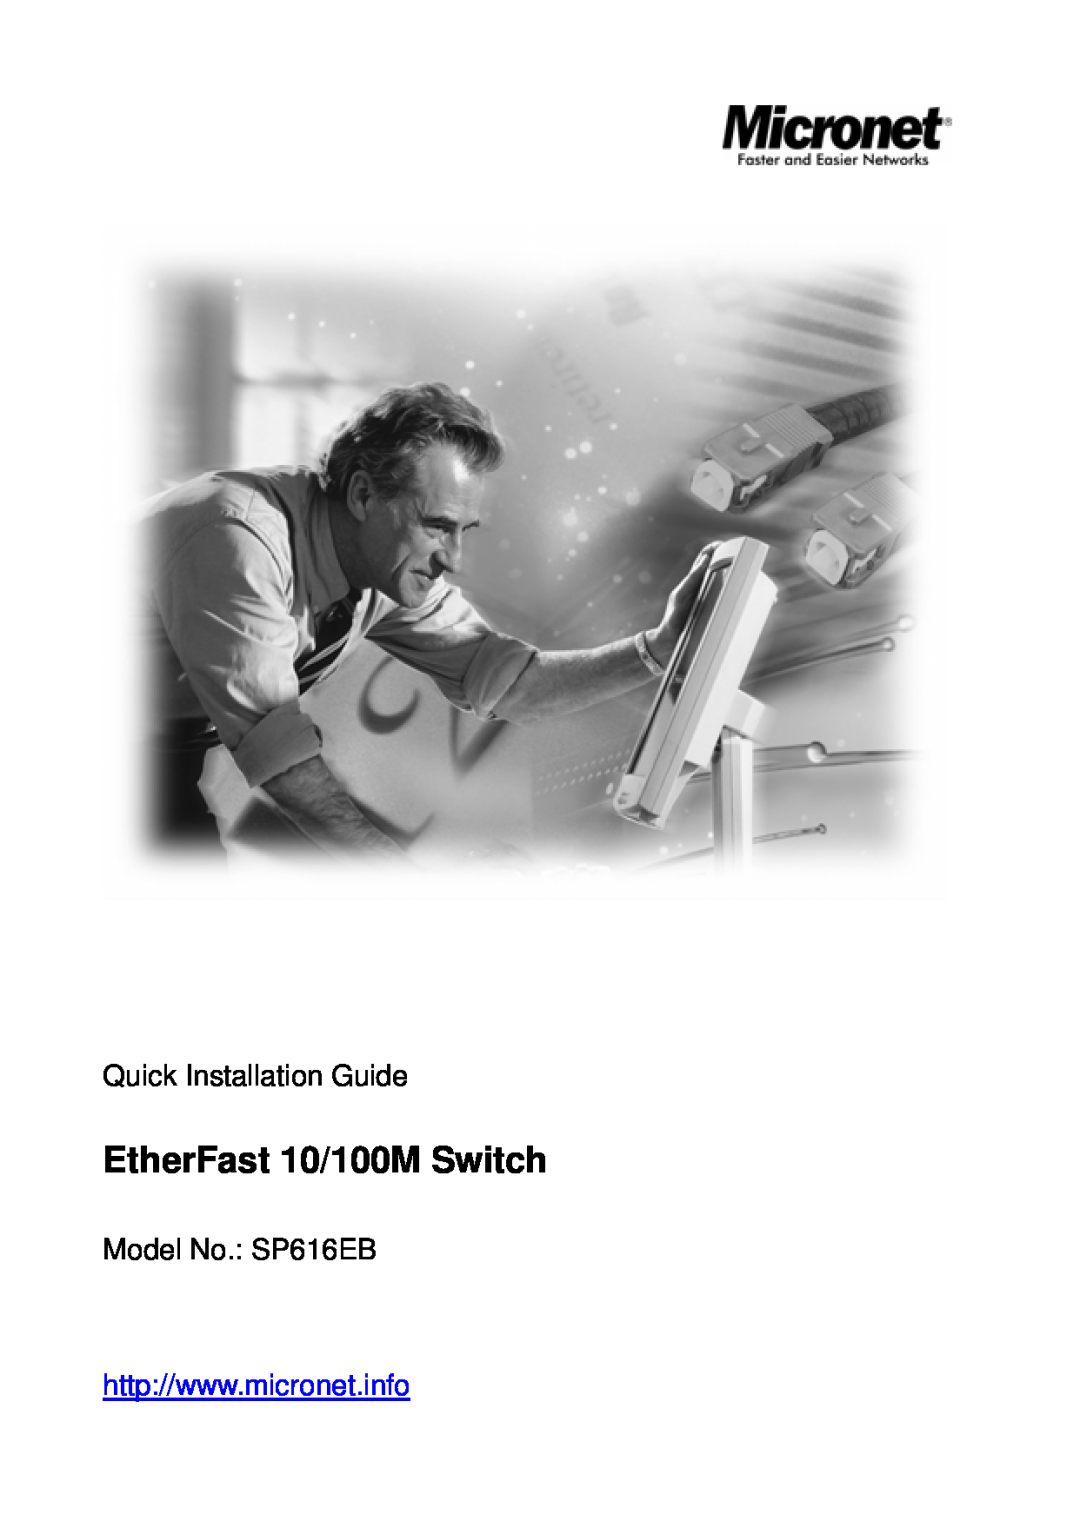 MicroNet Technology manual EtherFast 10/100M Switch, Quick Installation Guide, Model No. SP616EB 